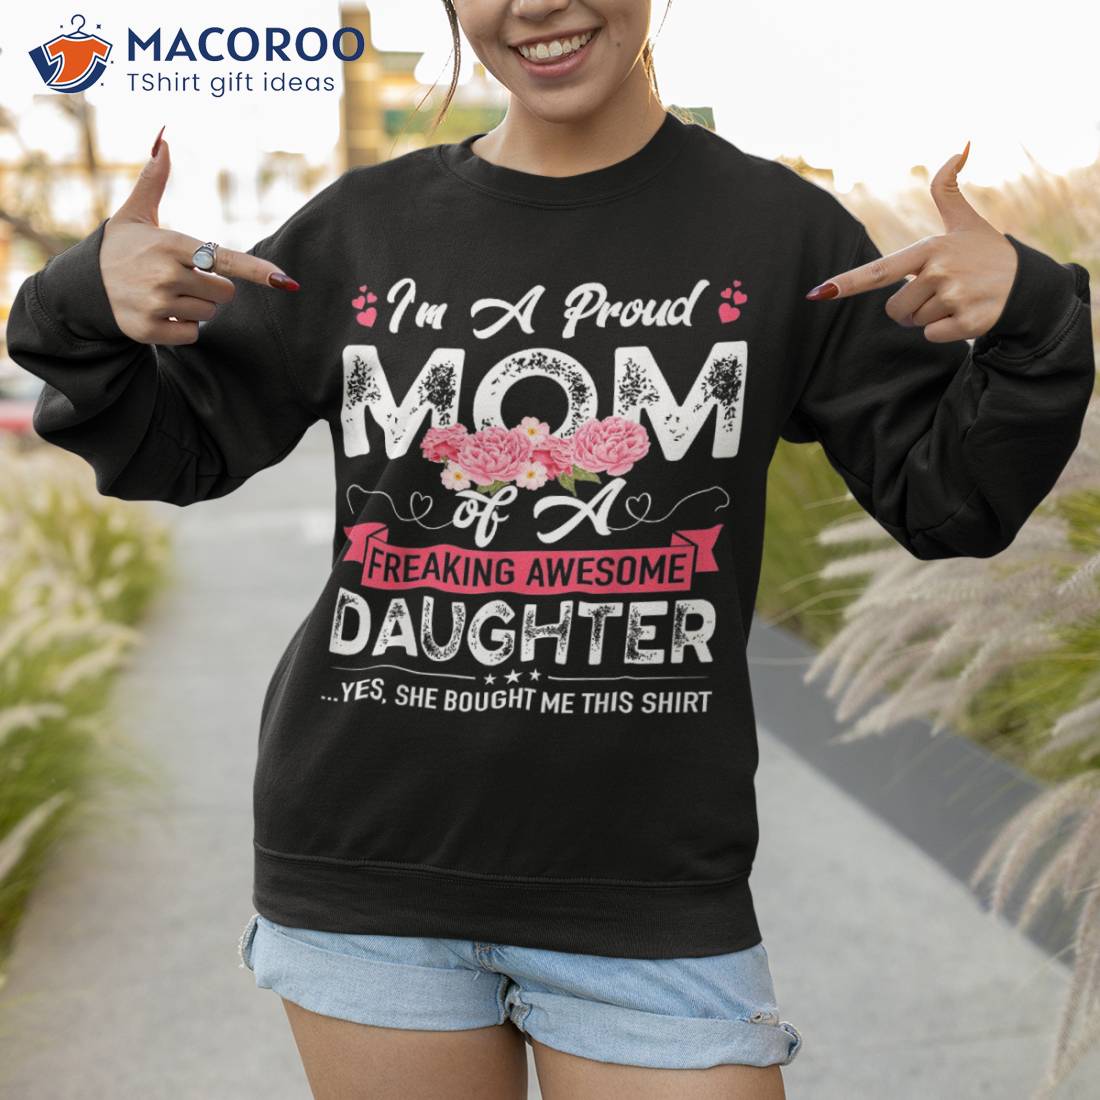 https://images.macoroo.com/wp-content/uploads/2023/05/mothers-day-i-m-a-proud-mom-gifts-from-daughter-son-kids-shirt-sweatshirt-1.jpg